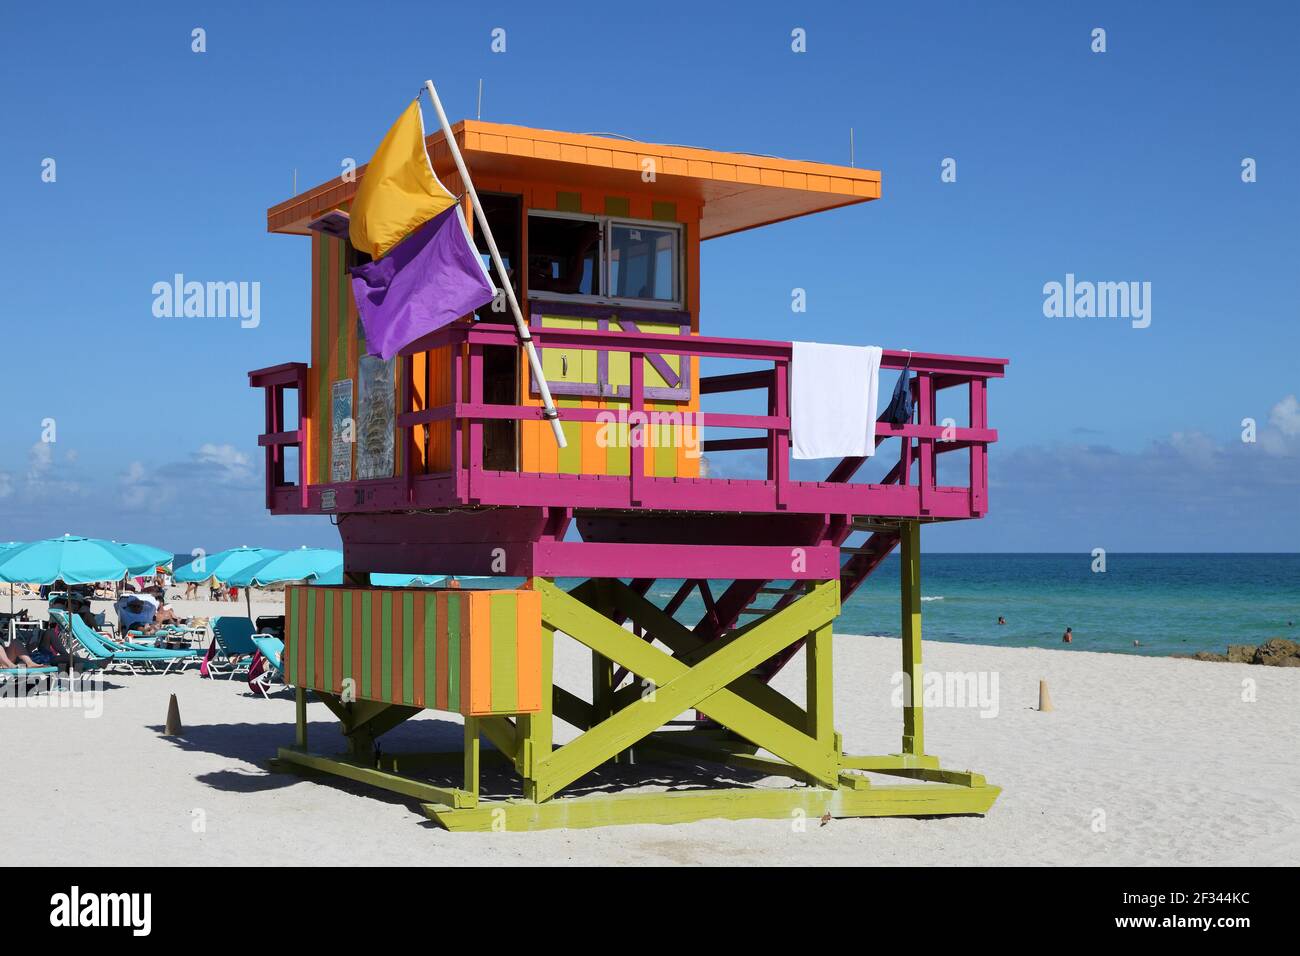 Géographie / Voyage, Etats-Unis, Floride, Miami Beach, Baywatch station (Life Guard petite maison), Additional-Rights-Clearance-Info-not-available Banque D'Images